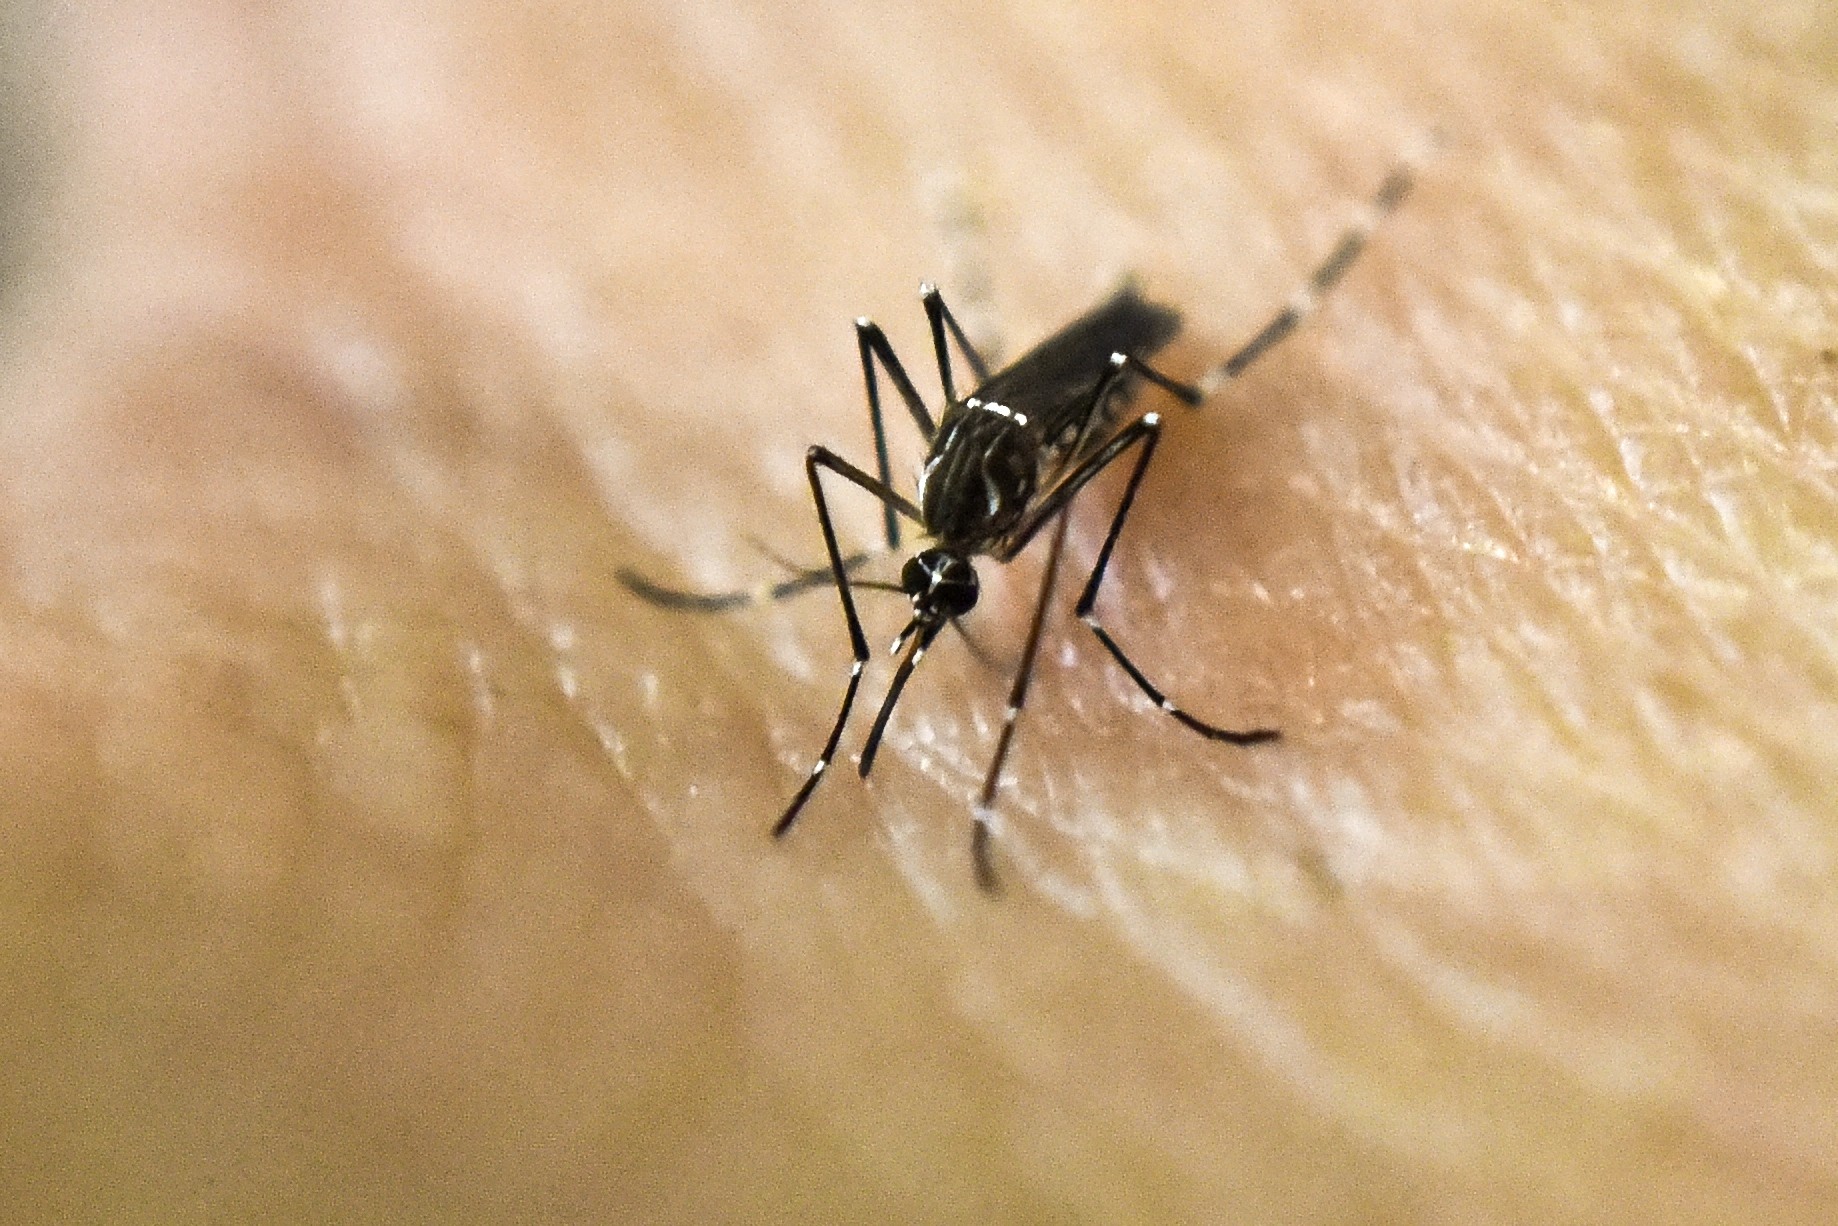 With climate change, disease-carrying mosquito species like Aedes aegypti are growing faster. While dengue is not endemic in Hong Kong, a record 163 cases were reported here in 2018. Photo: AFP